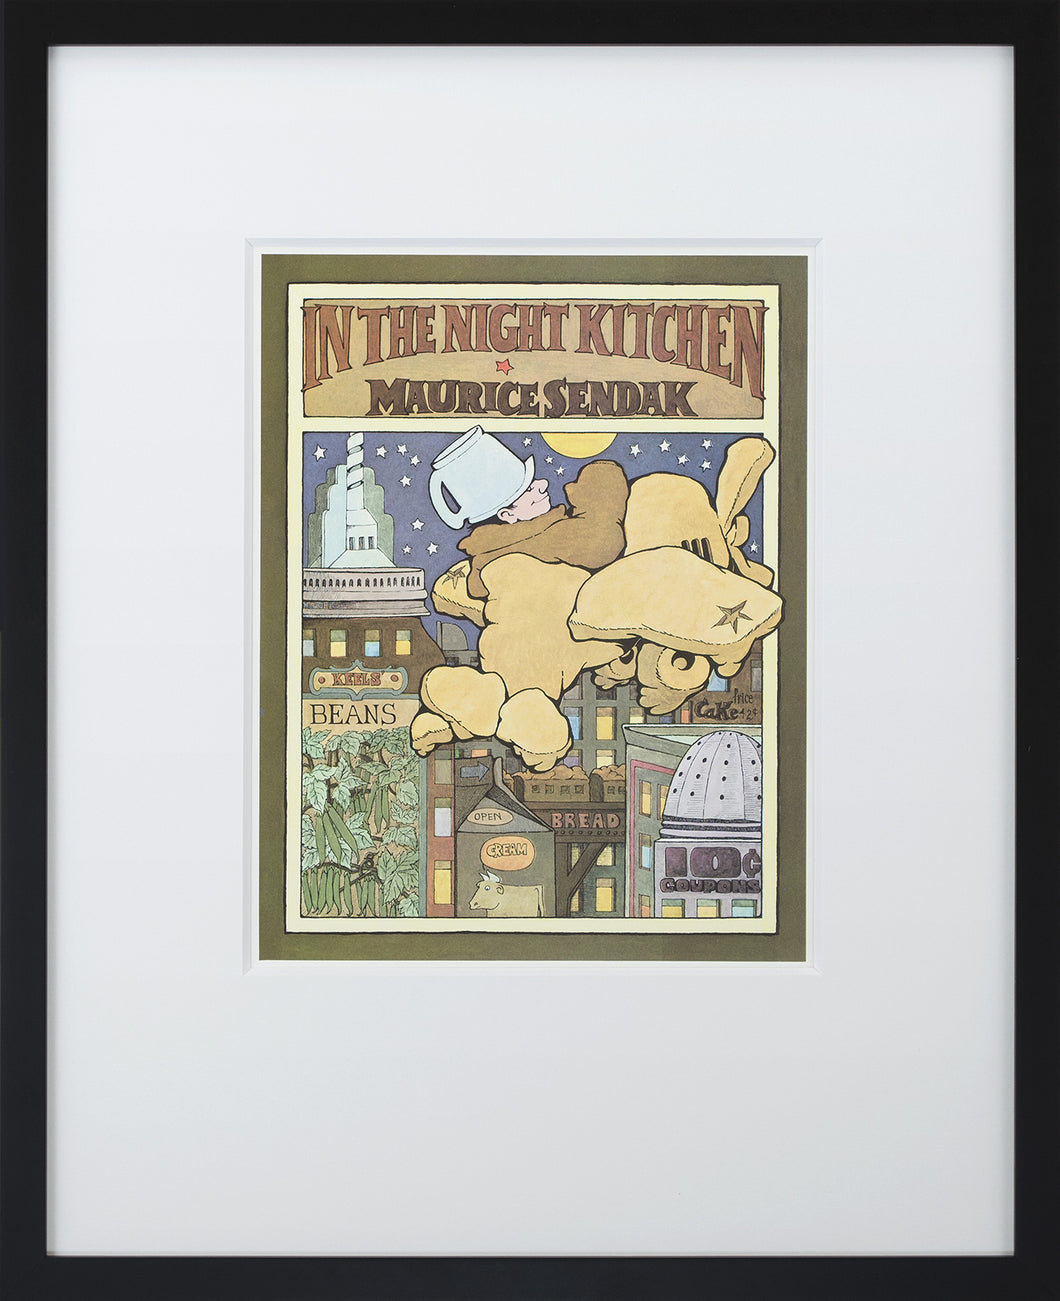 In the Night Kitchen by Maurice Sendak Framed Art Print - Special Edition by Museums.Co